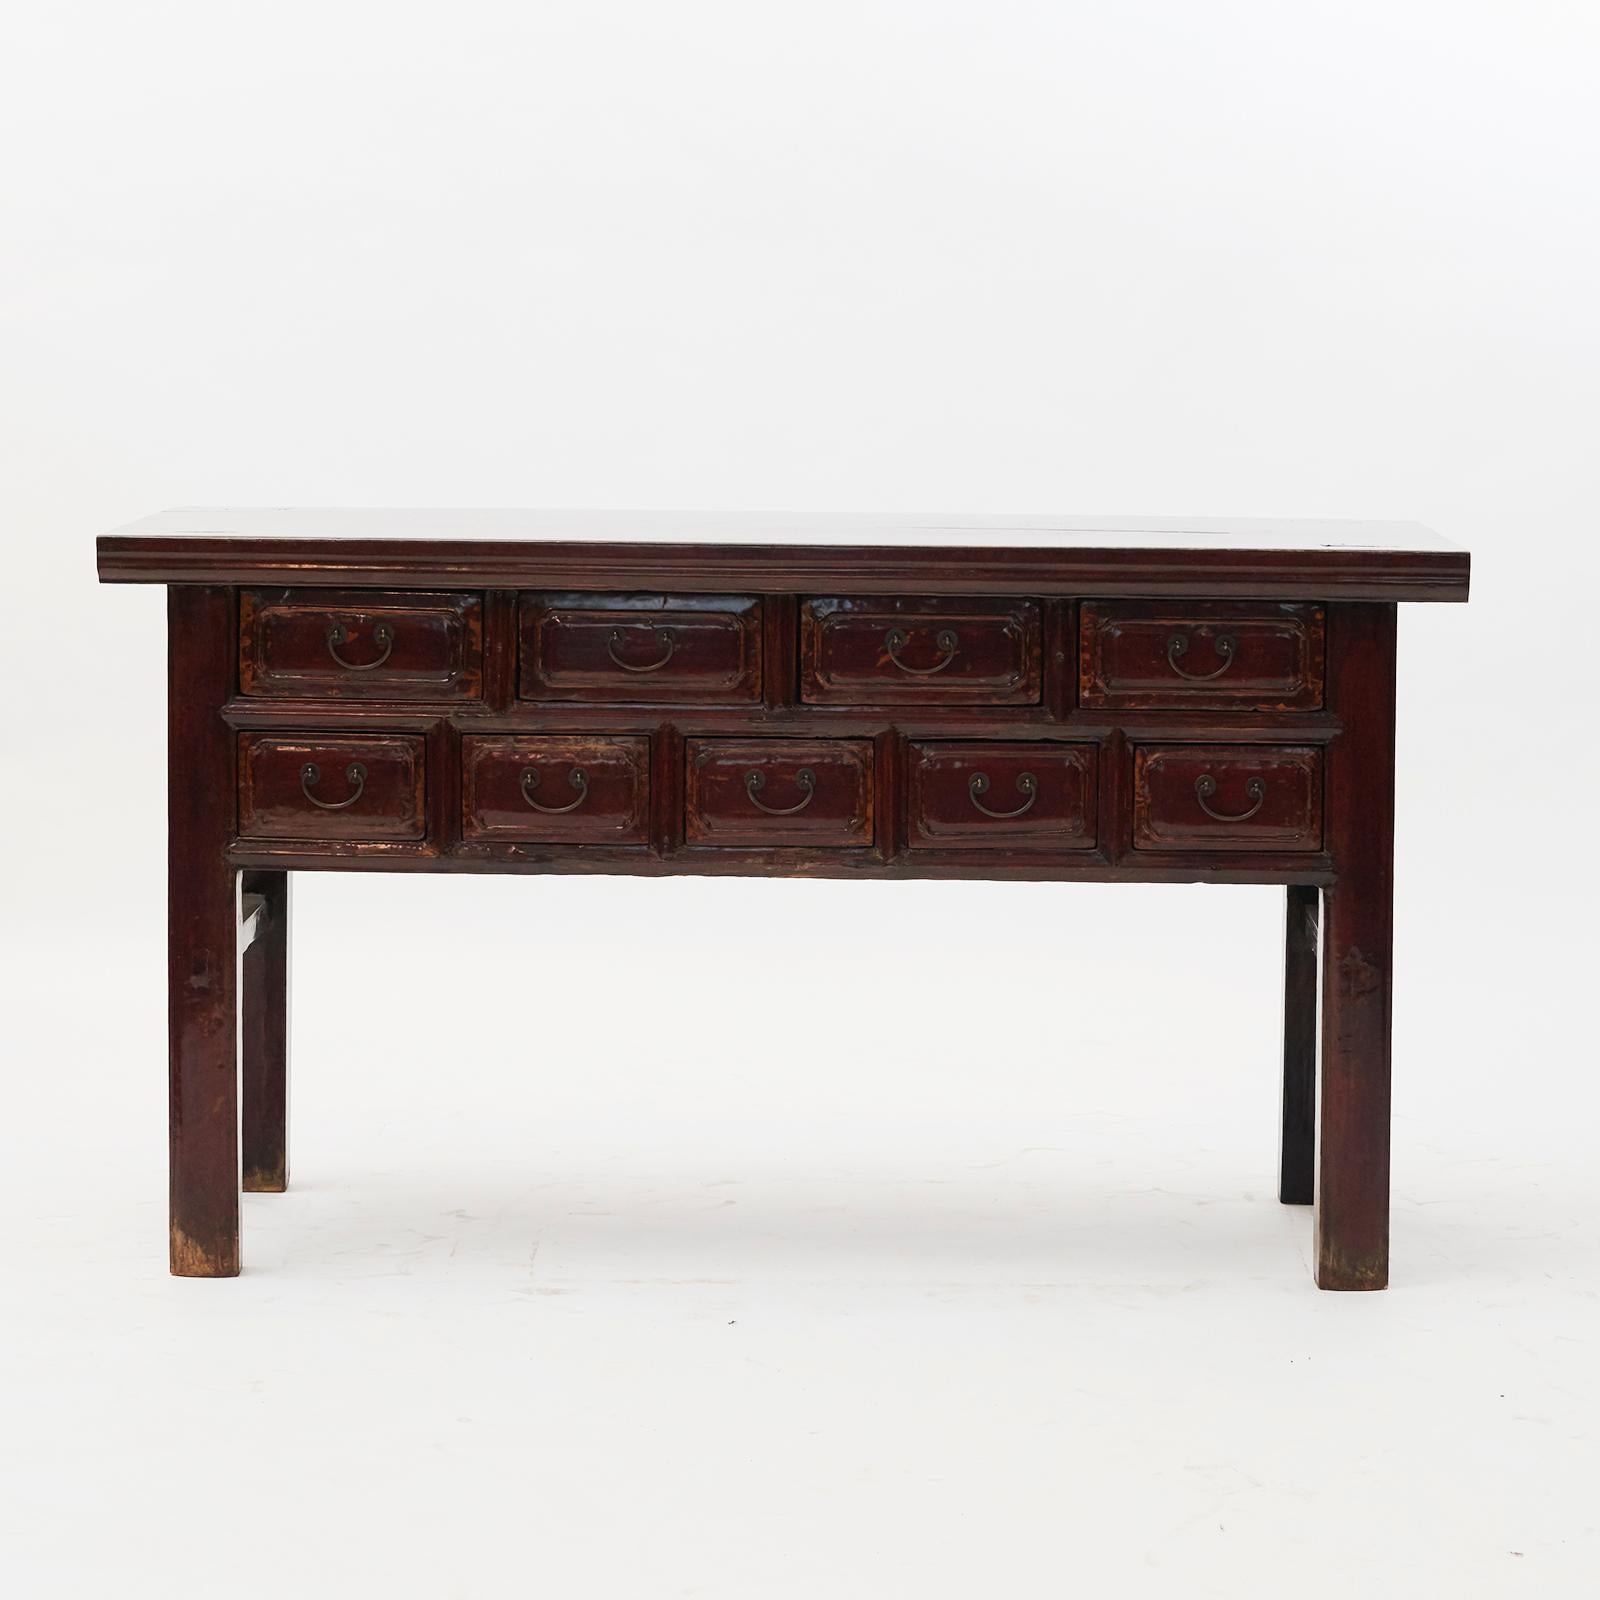 Console table with 9 drawers, original deep red lacquer. Crafted in walnut with stunning patina. From Shanxi Province, China, 1830-1840.
Well suited both against a wall, behind sofa or as stand alone table.
      